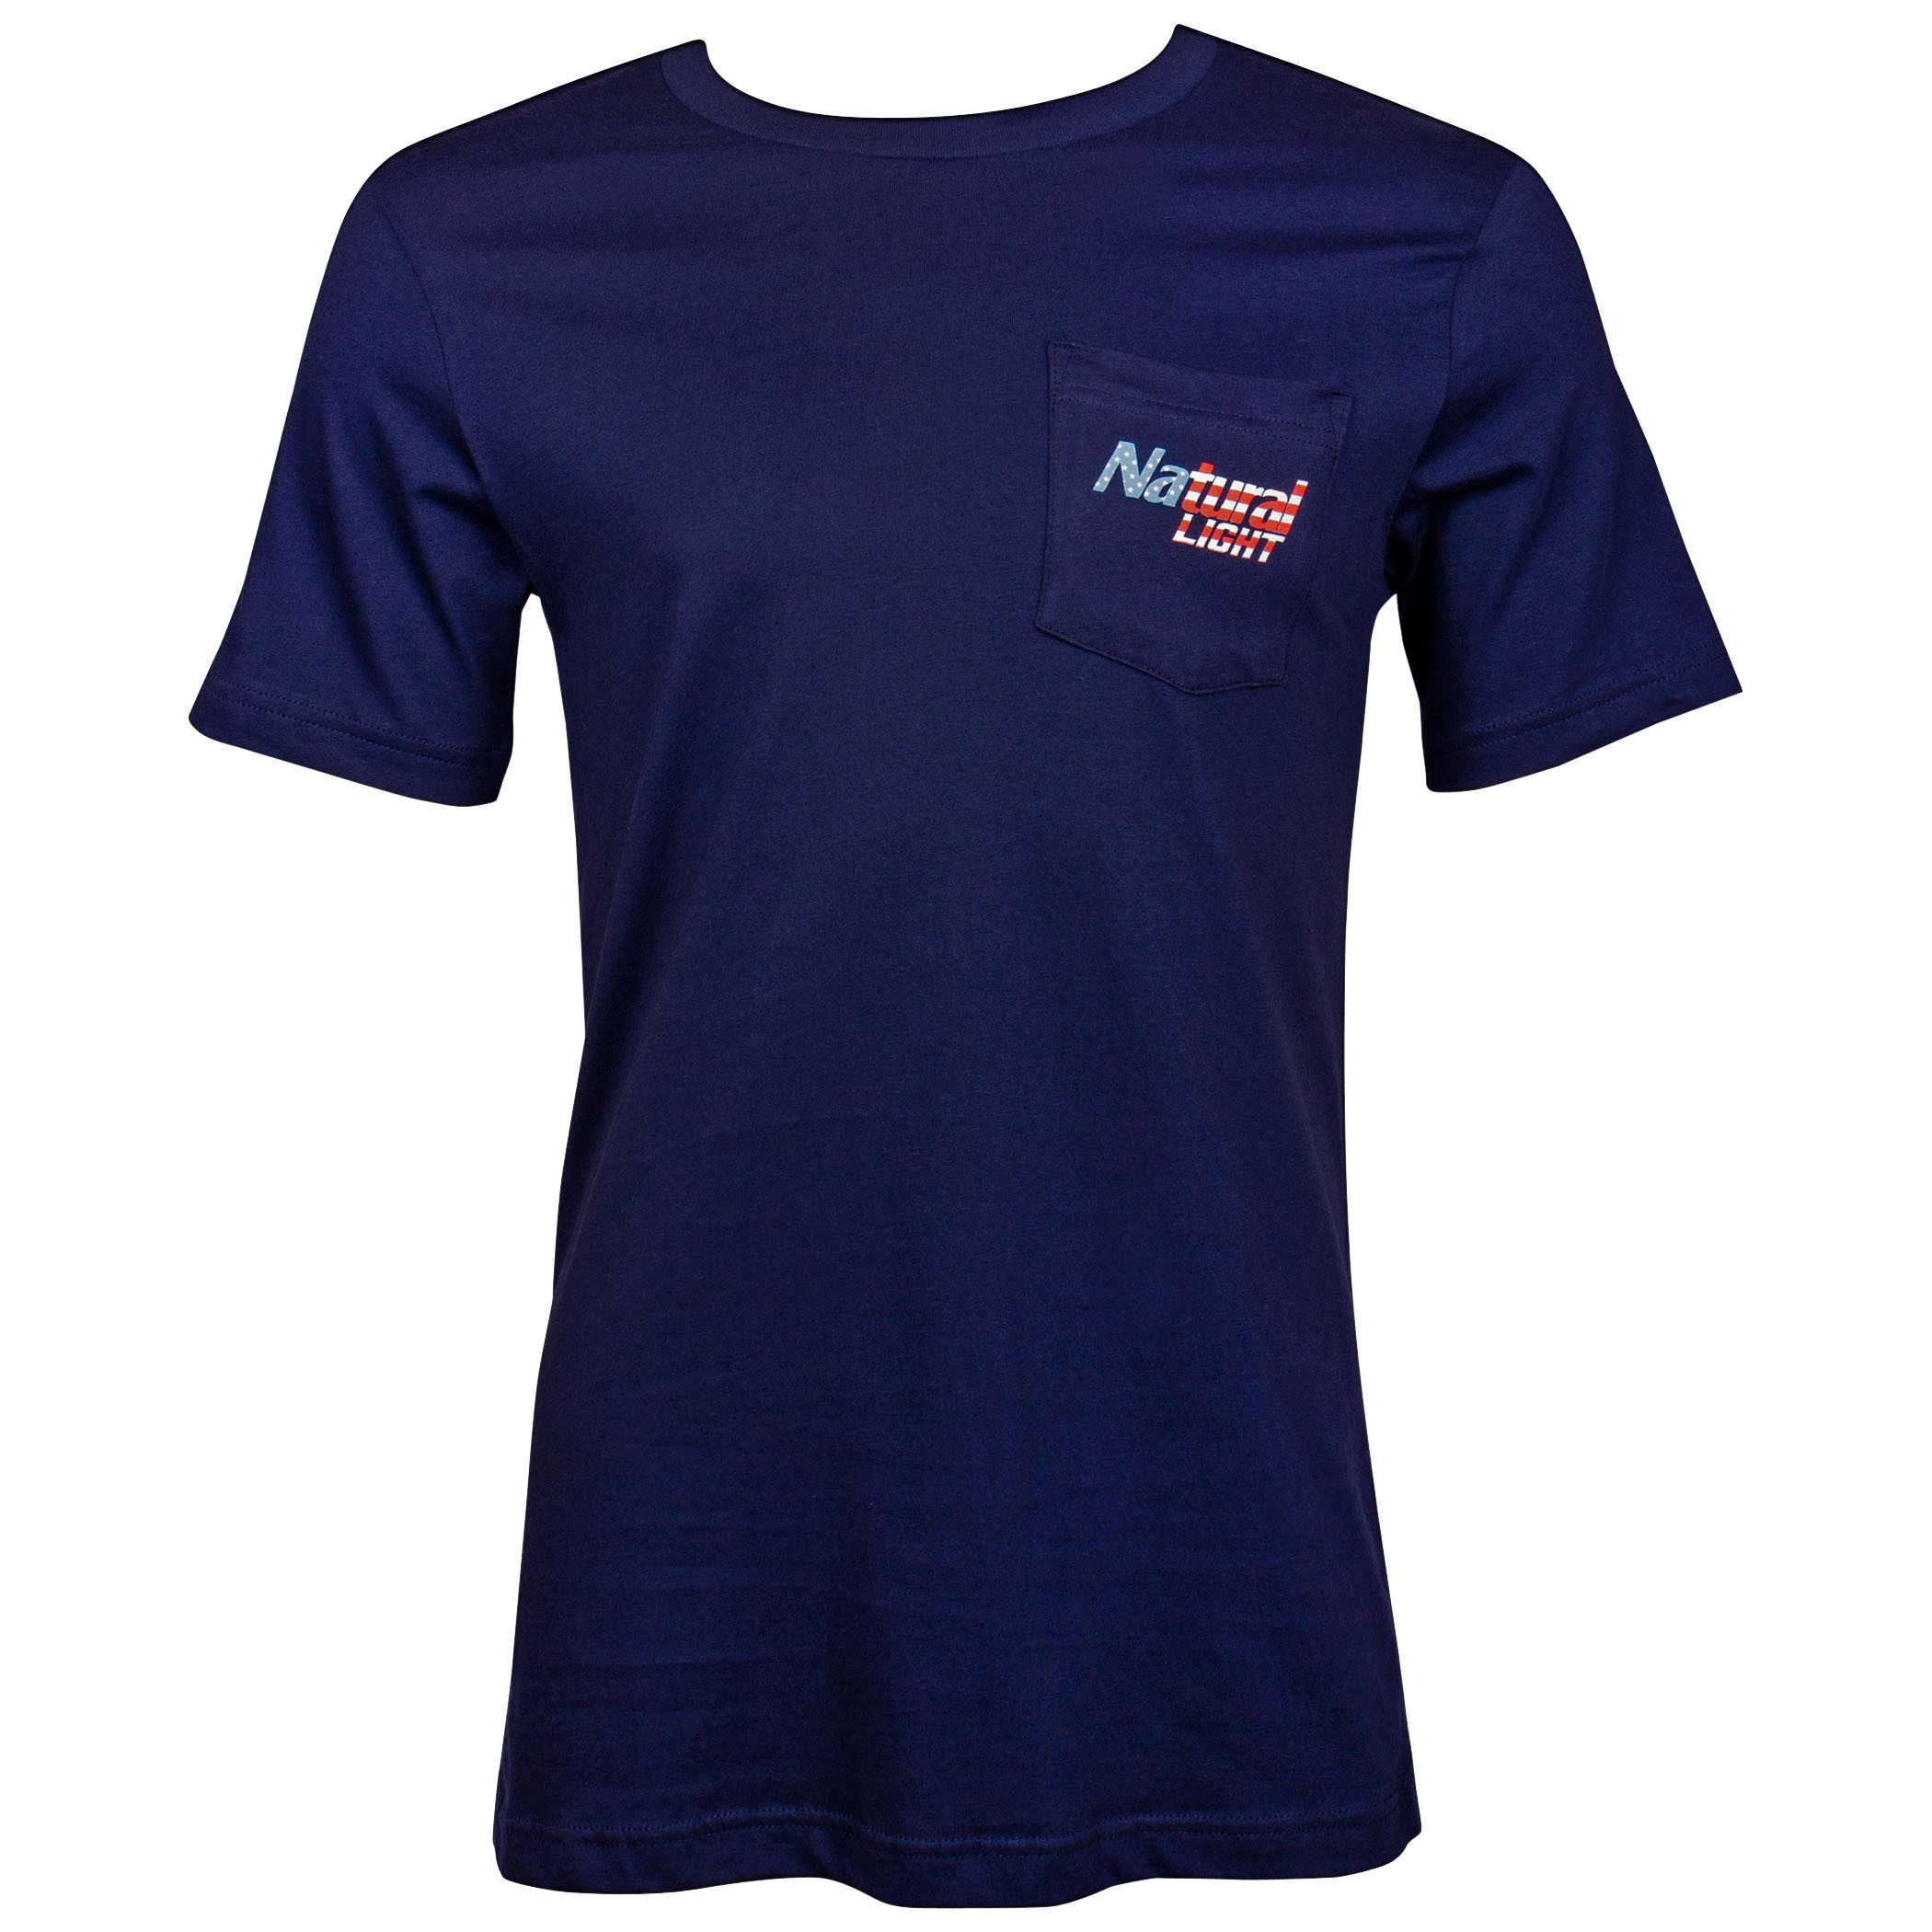 Natural Light Red White and Blue Logo T-Shirt